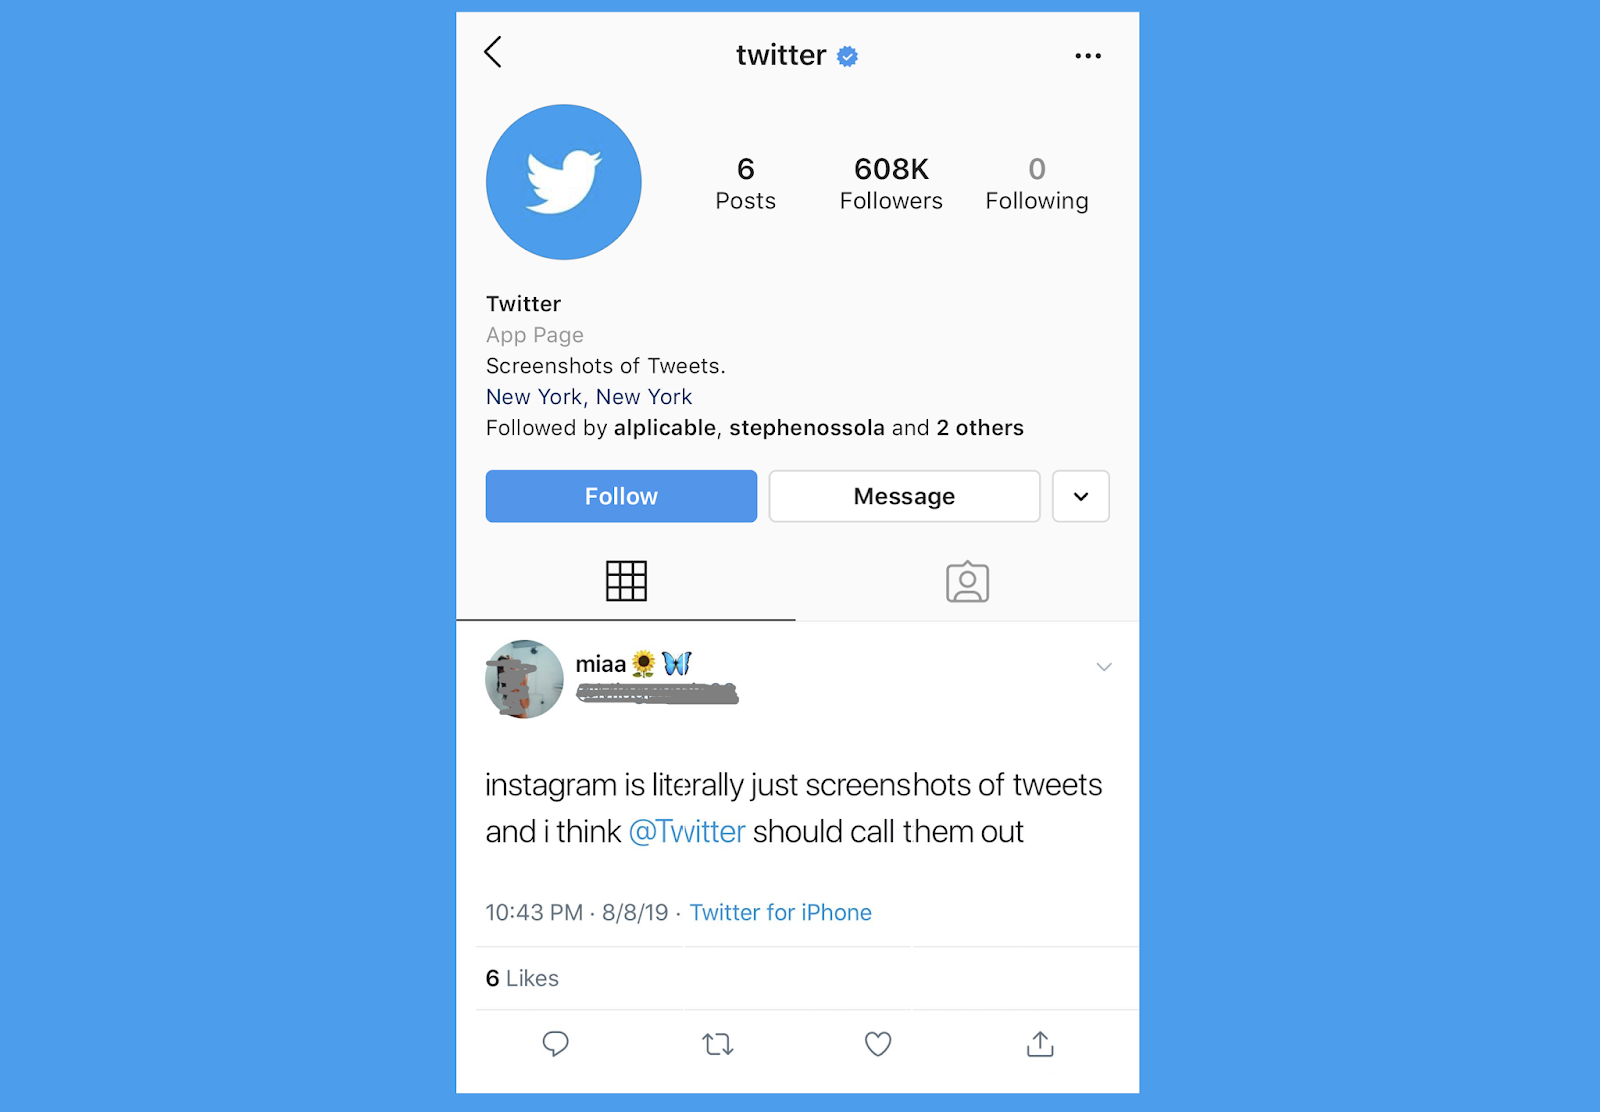 Twitter Calls Out Instagram For Gaining Notoriety With Screenshots Of Tweets Digital Information World